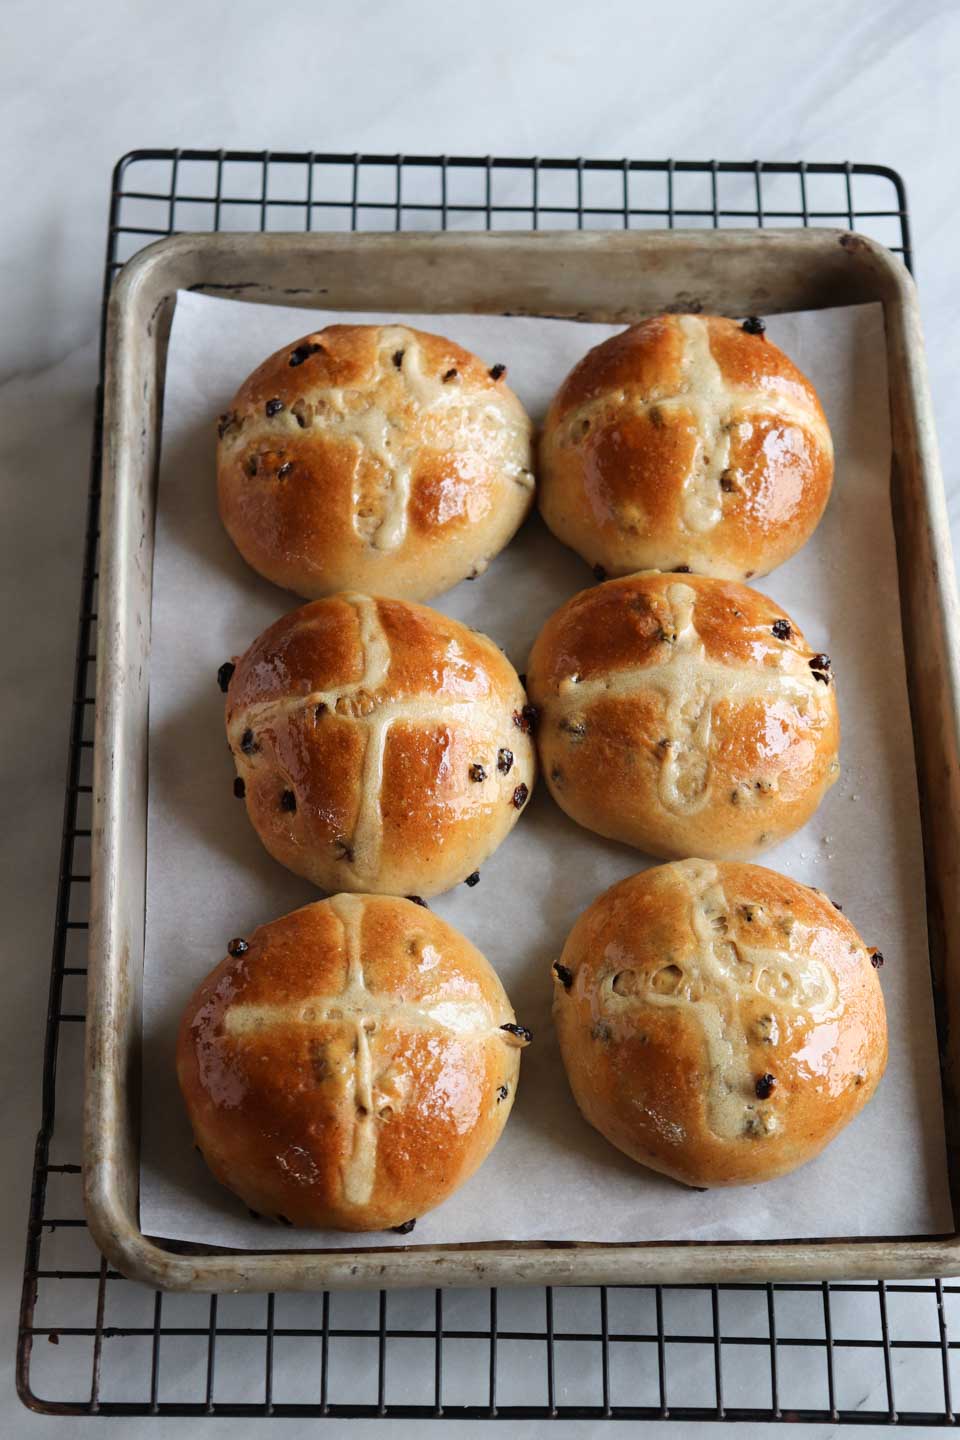 Classic Easter buns with traditional spices like clove, cinnamon and orange zest made eggless